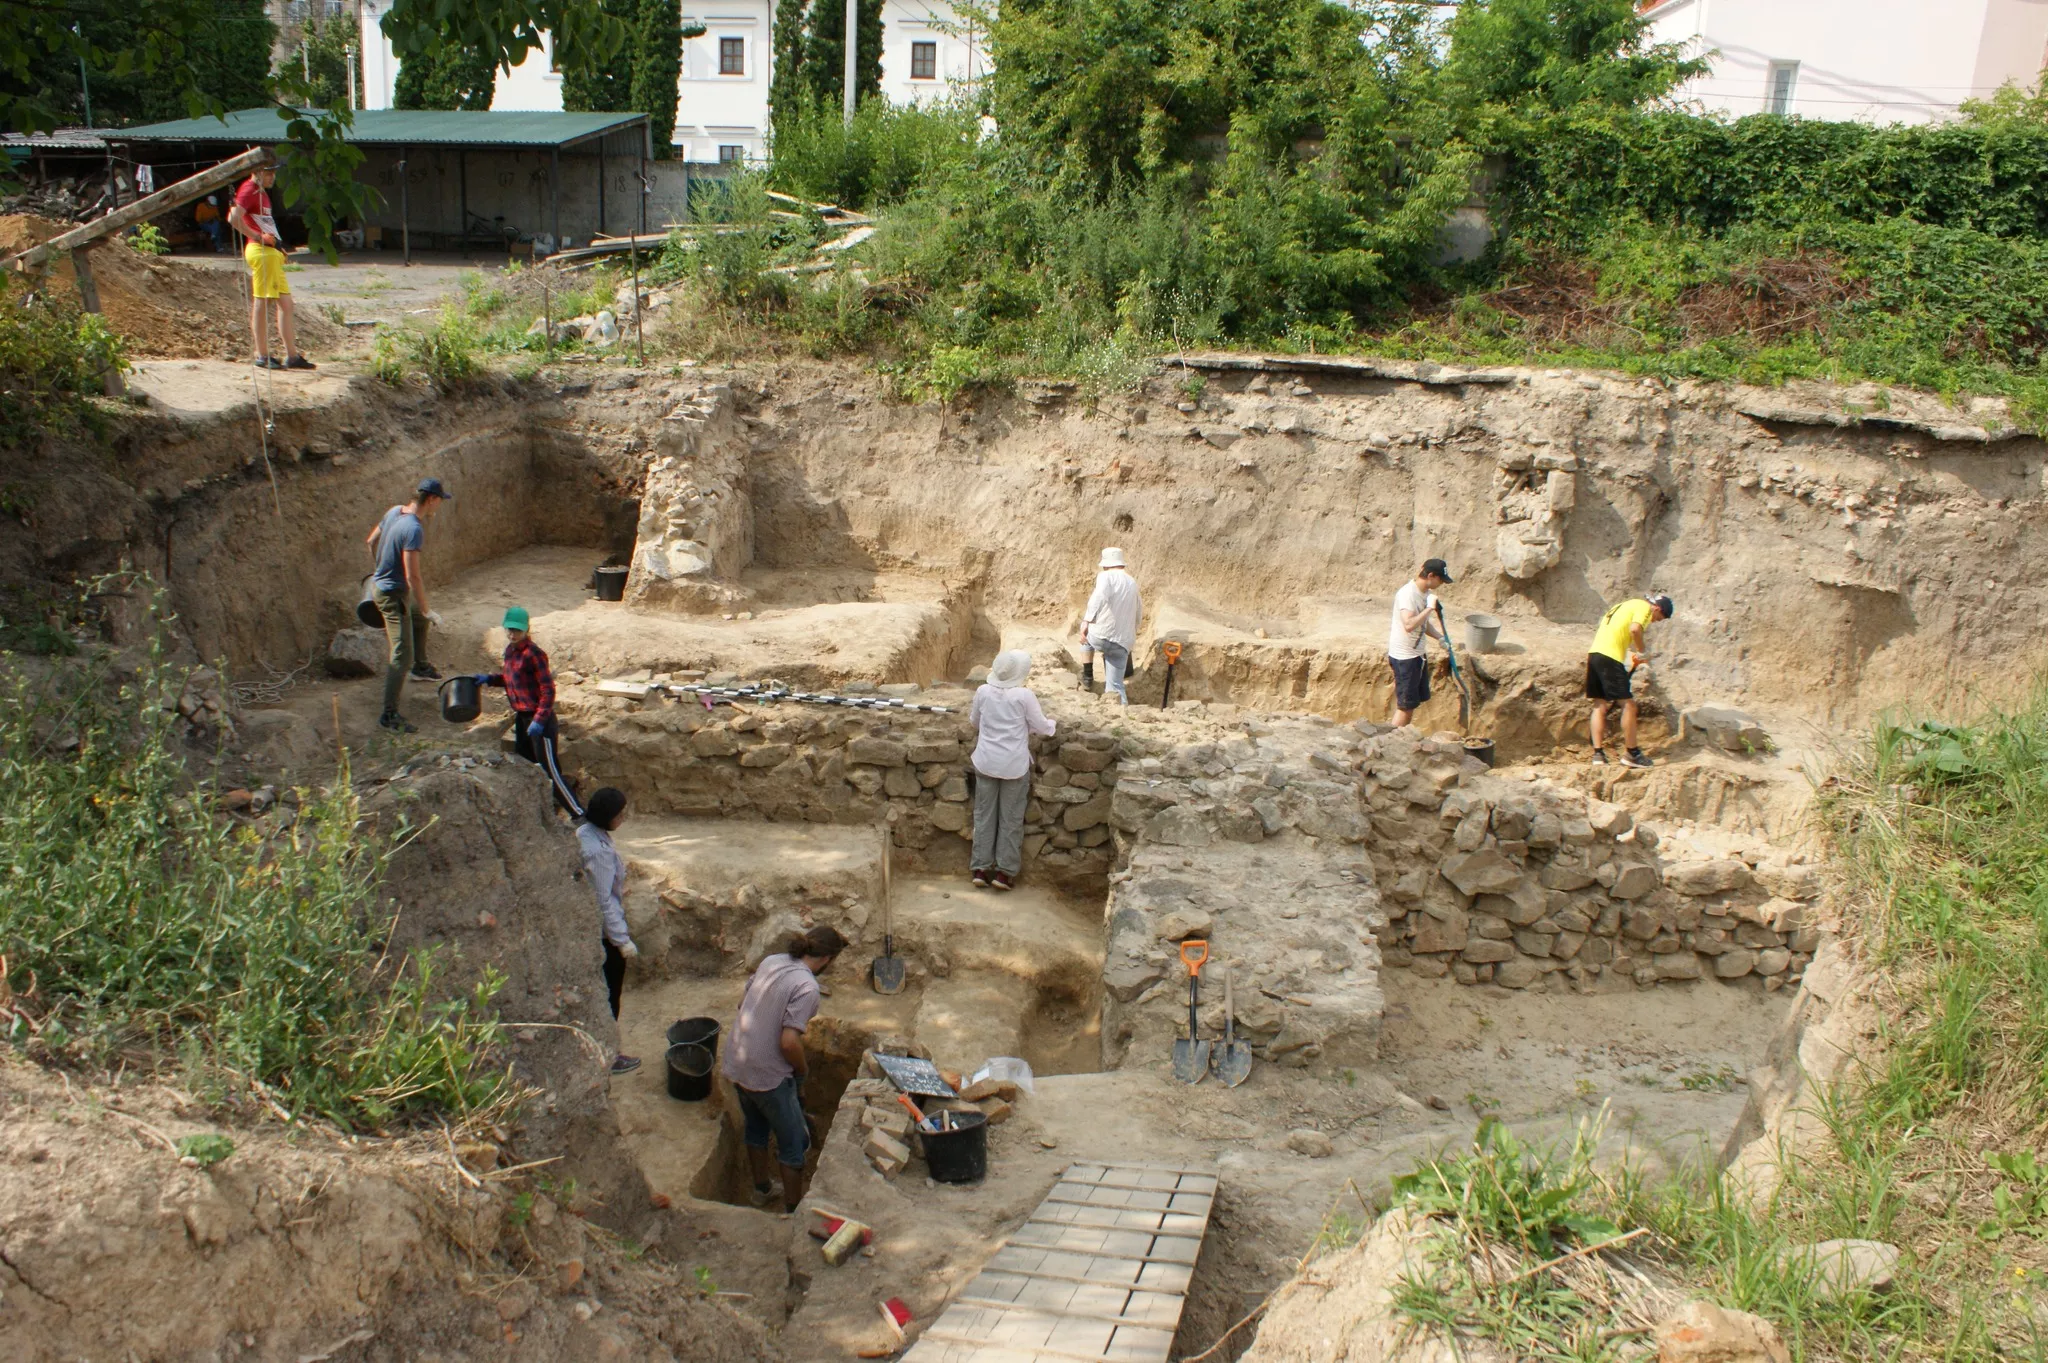 Scientists reported on findings during excavations in the center of Vinnytsia